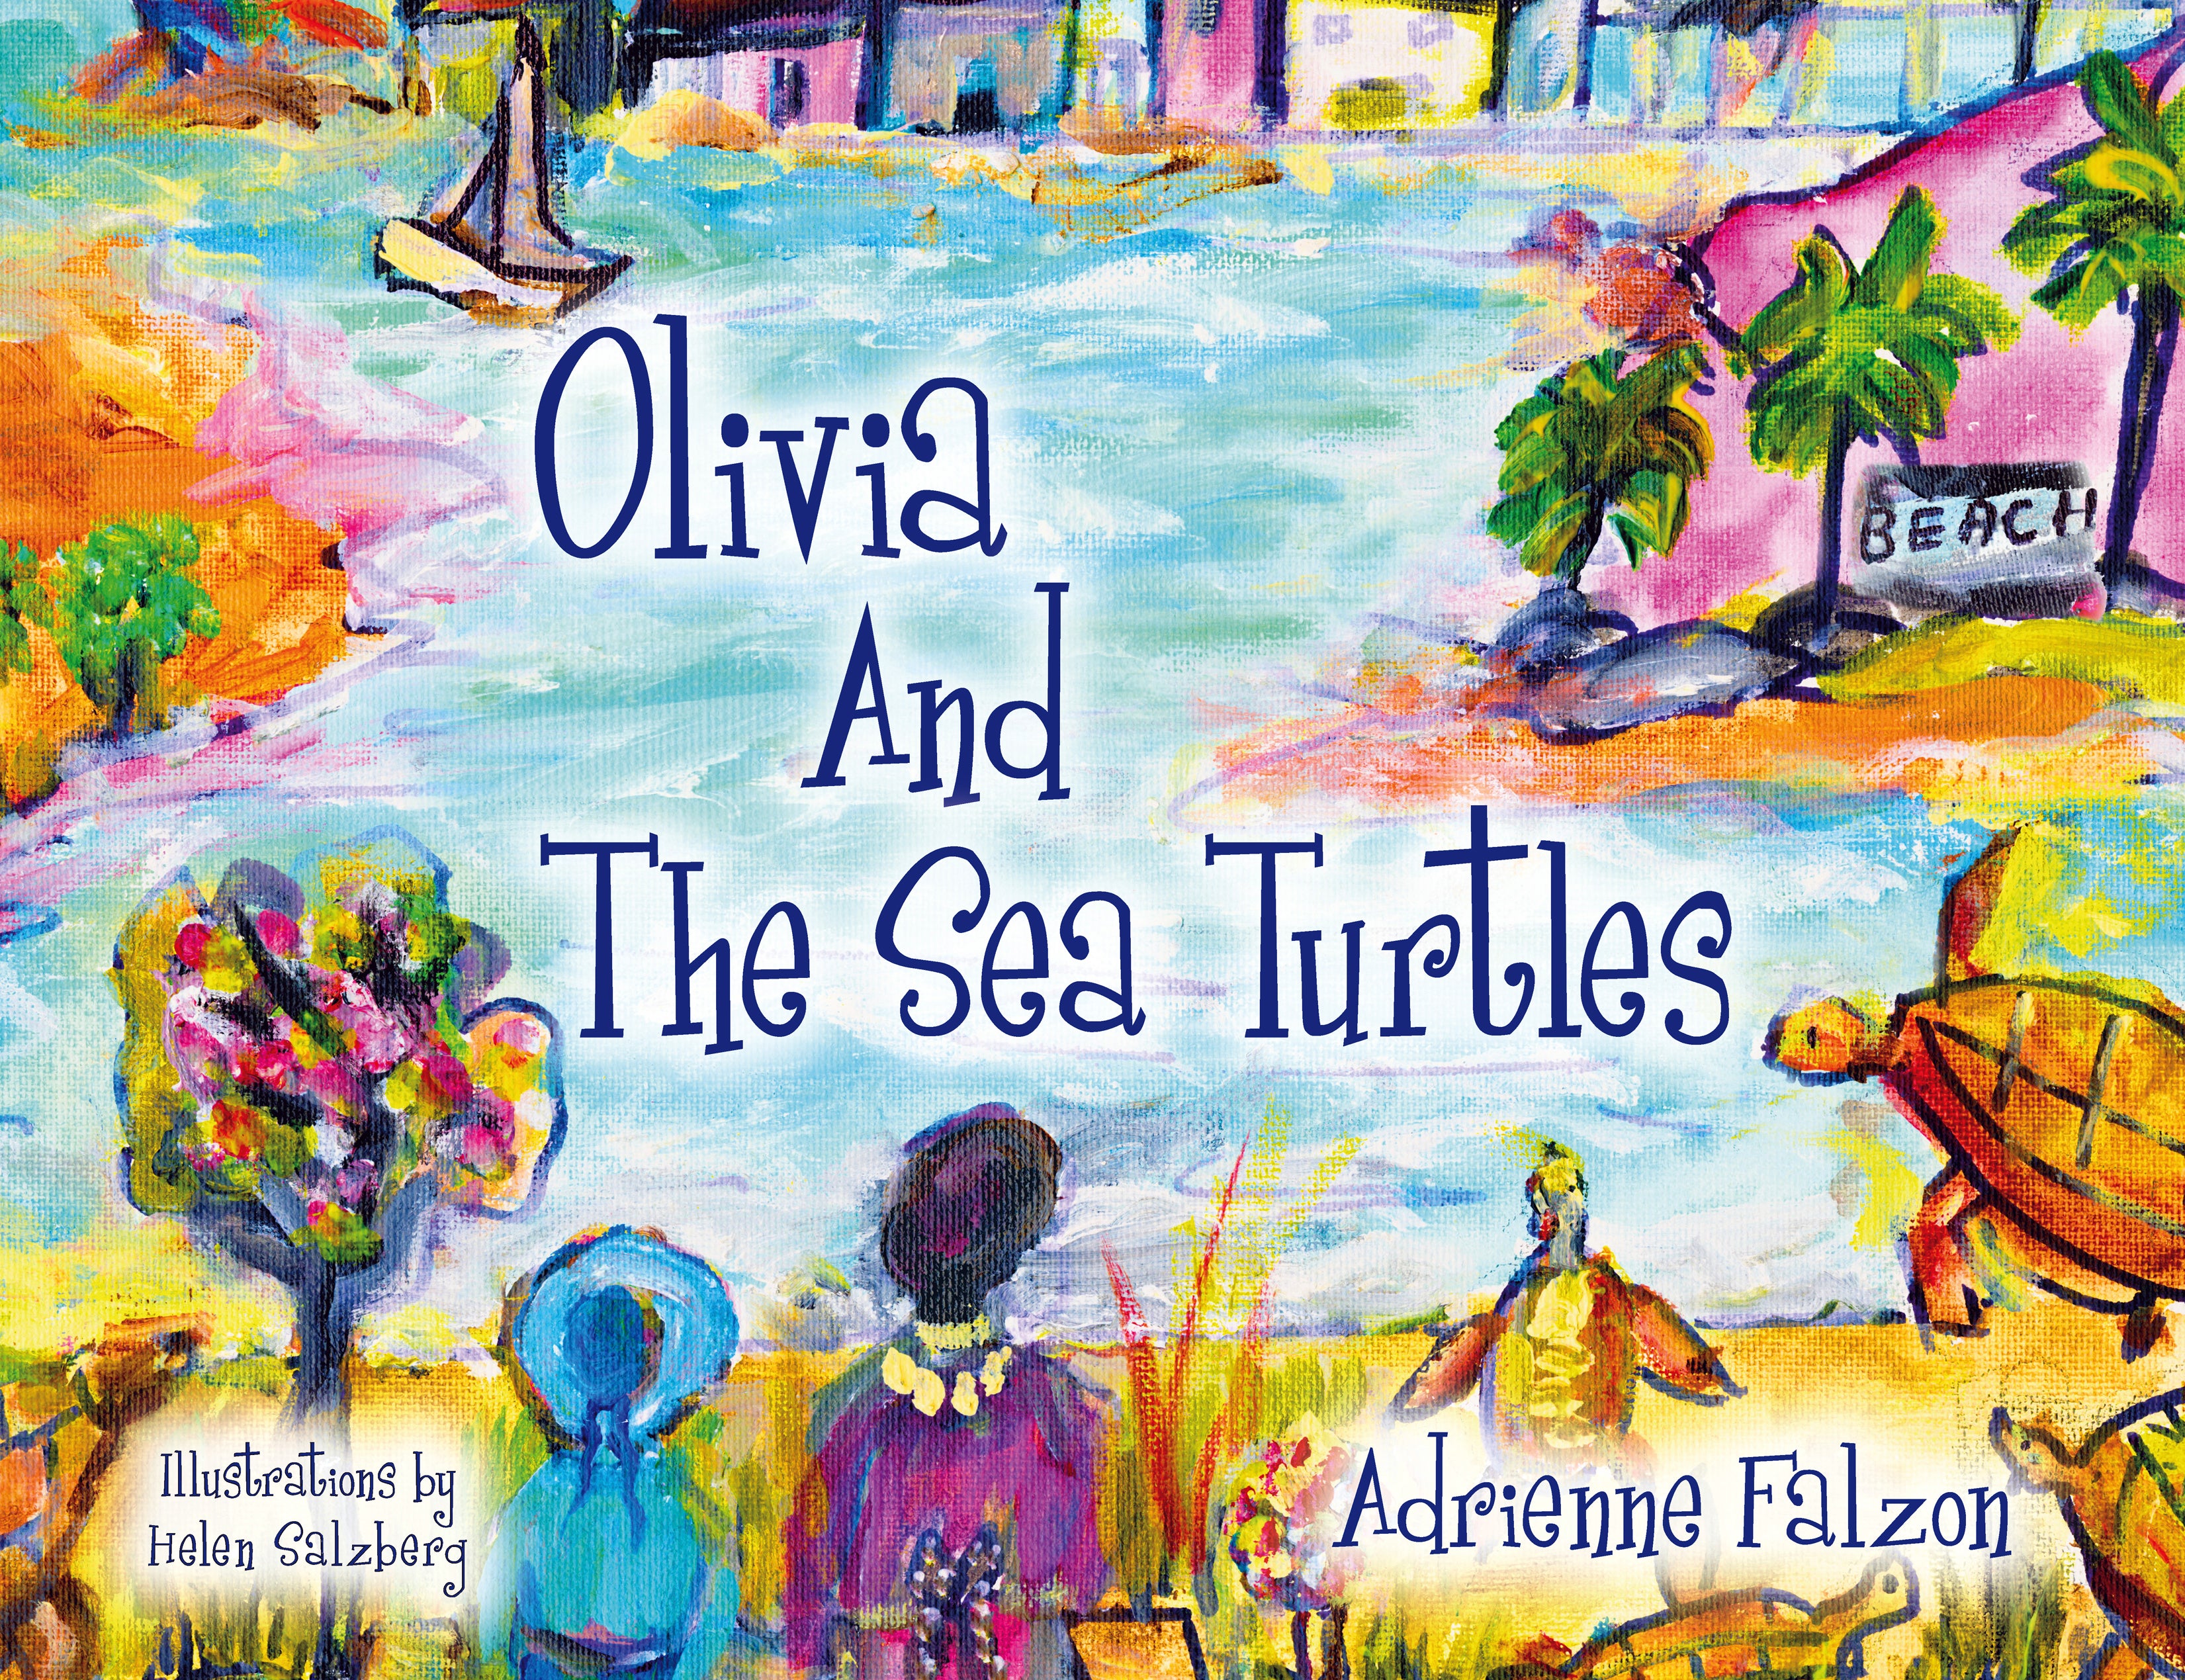 Olivia And The Sea Turtles - Blue Note Publications, Inc